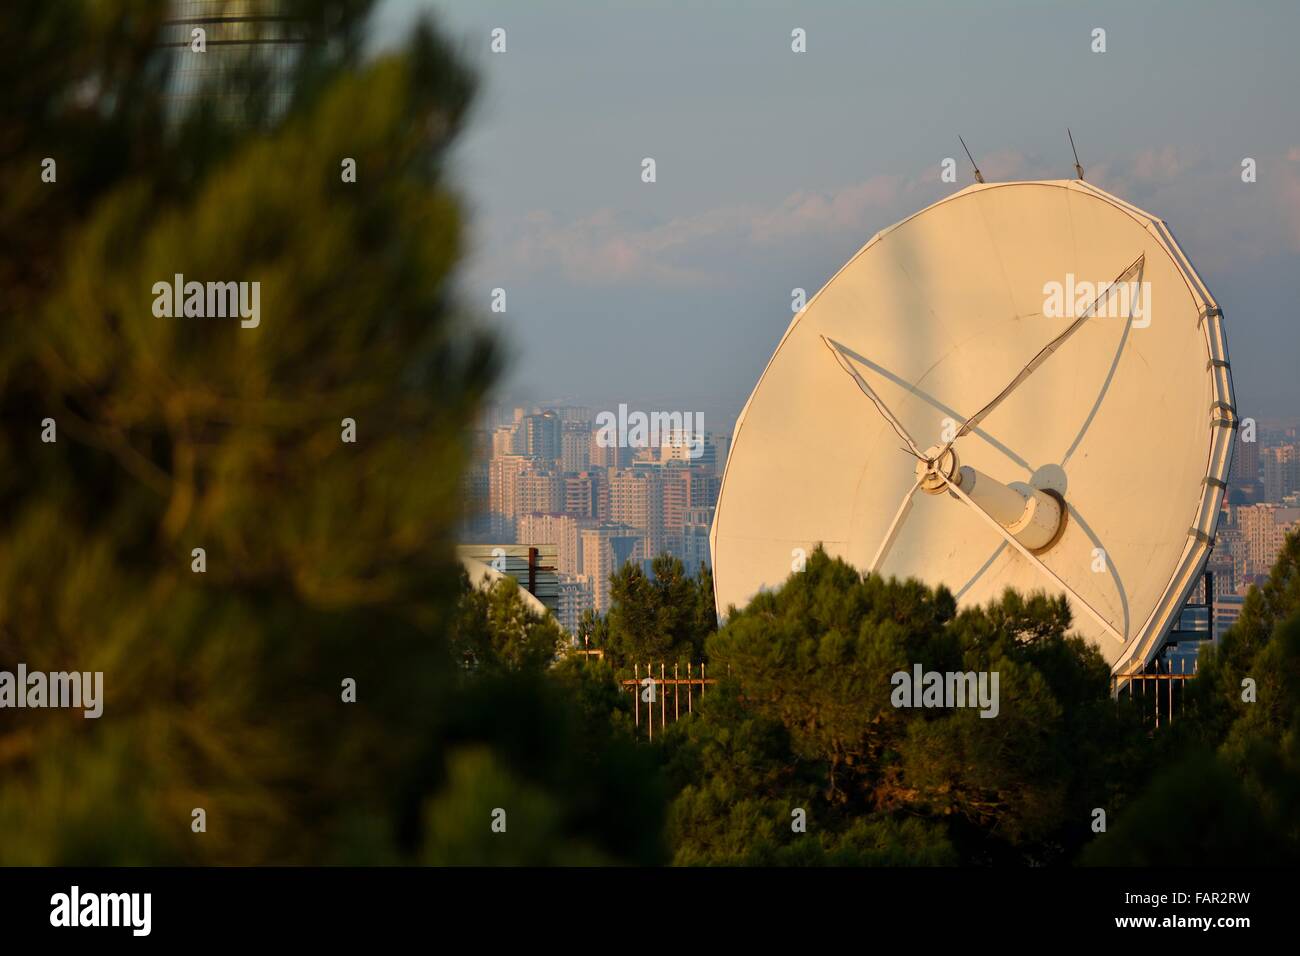 Large white satellite dish behind trees with a view of Baku, capital of Azerbaijan, in the background Stock Photo